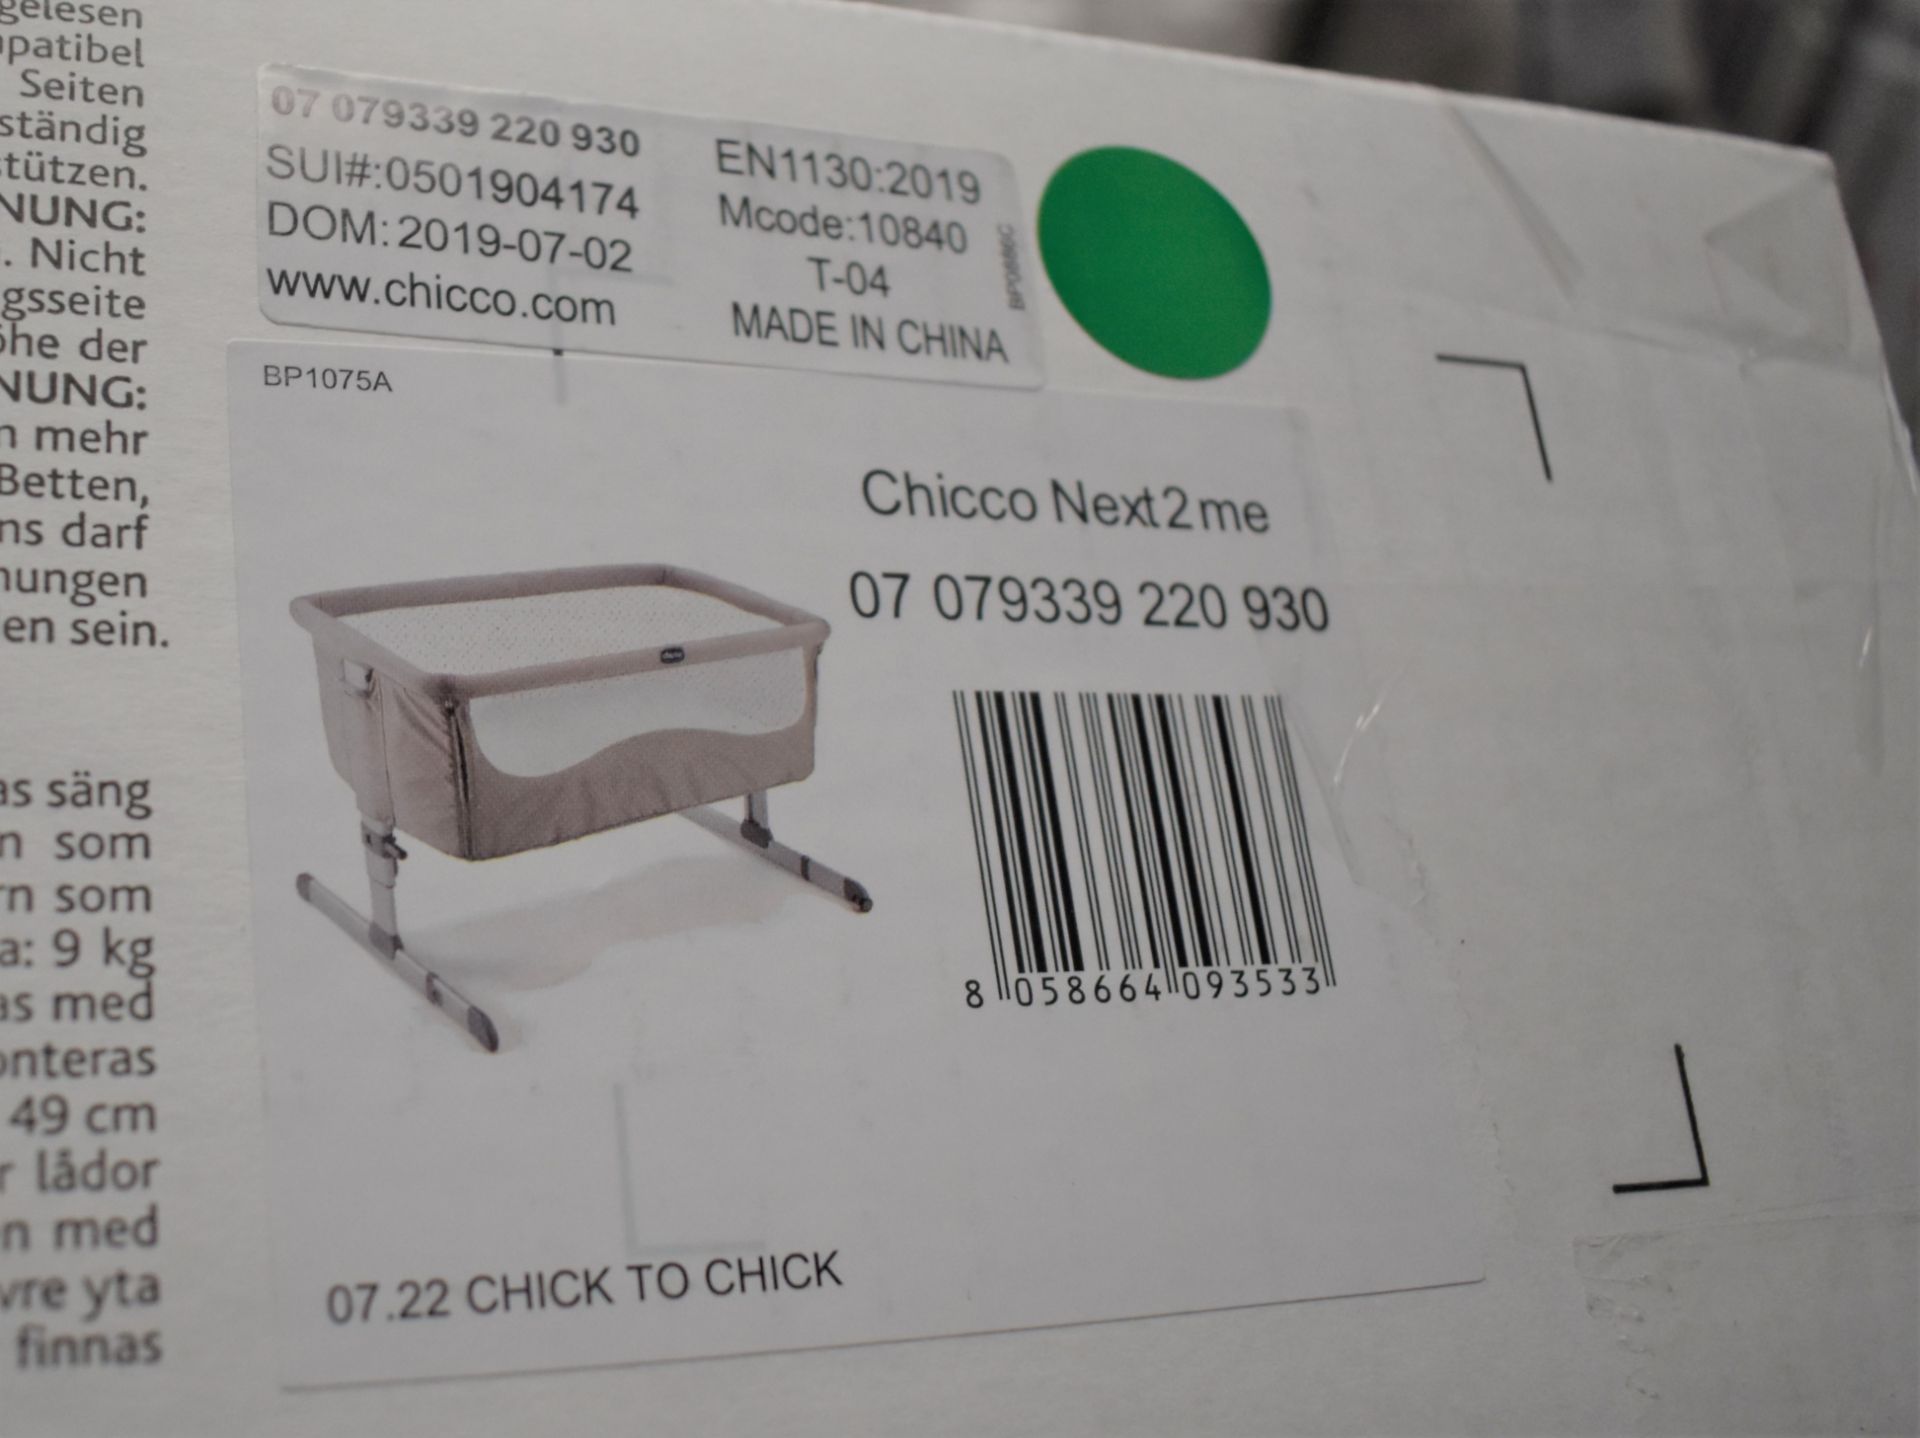 1 x Chicco Next2me Chick to Chick Bedside Baby Crib - Brand New 2019 Sealed Stock - Includes - Image 3 of 10